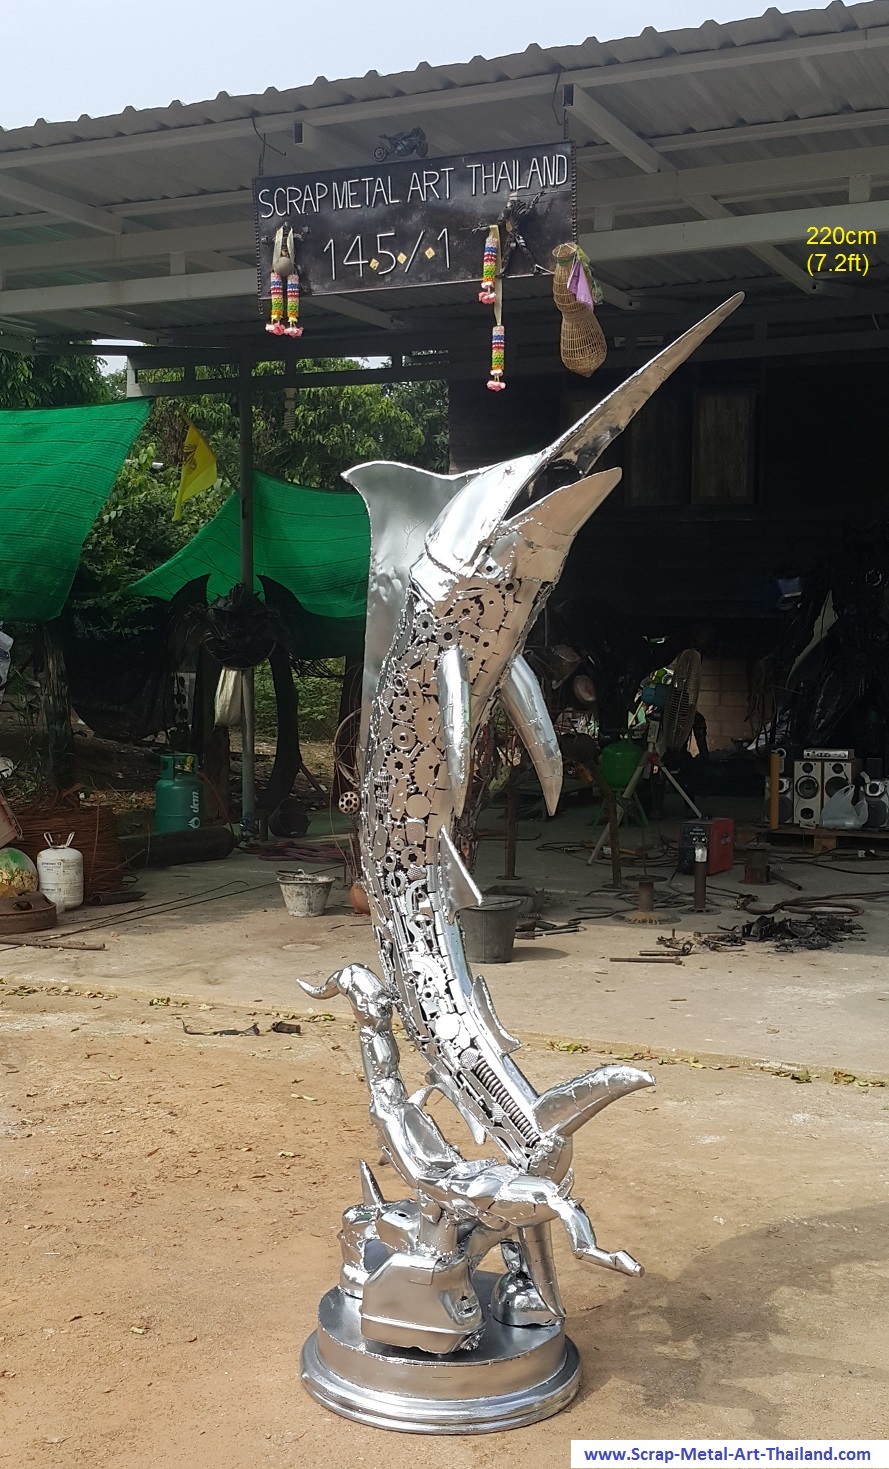 Blue Marlin Sculpture Statue for sale, Life Size Metal Animal Art, from Thailand